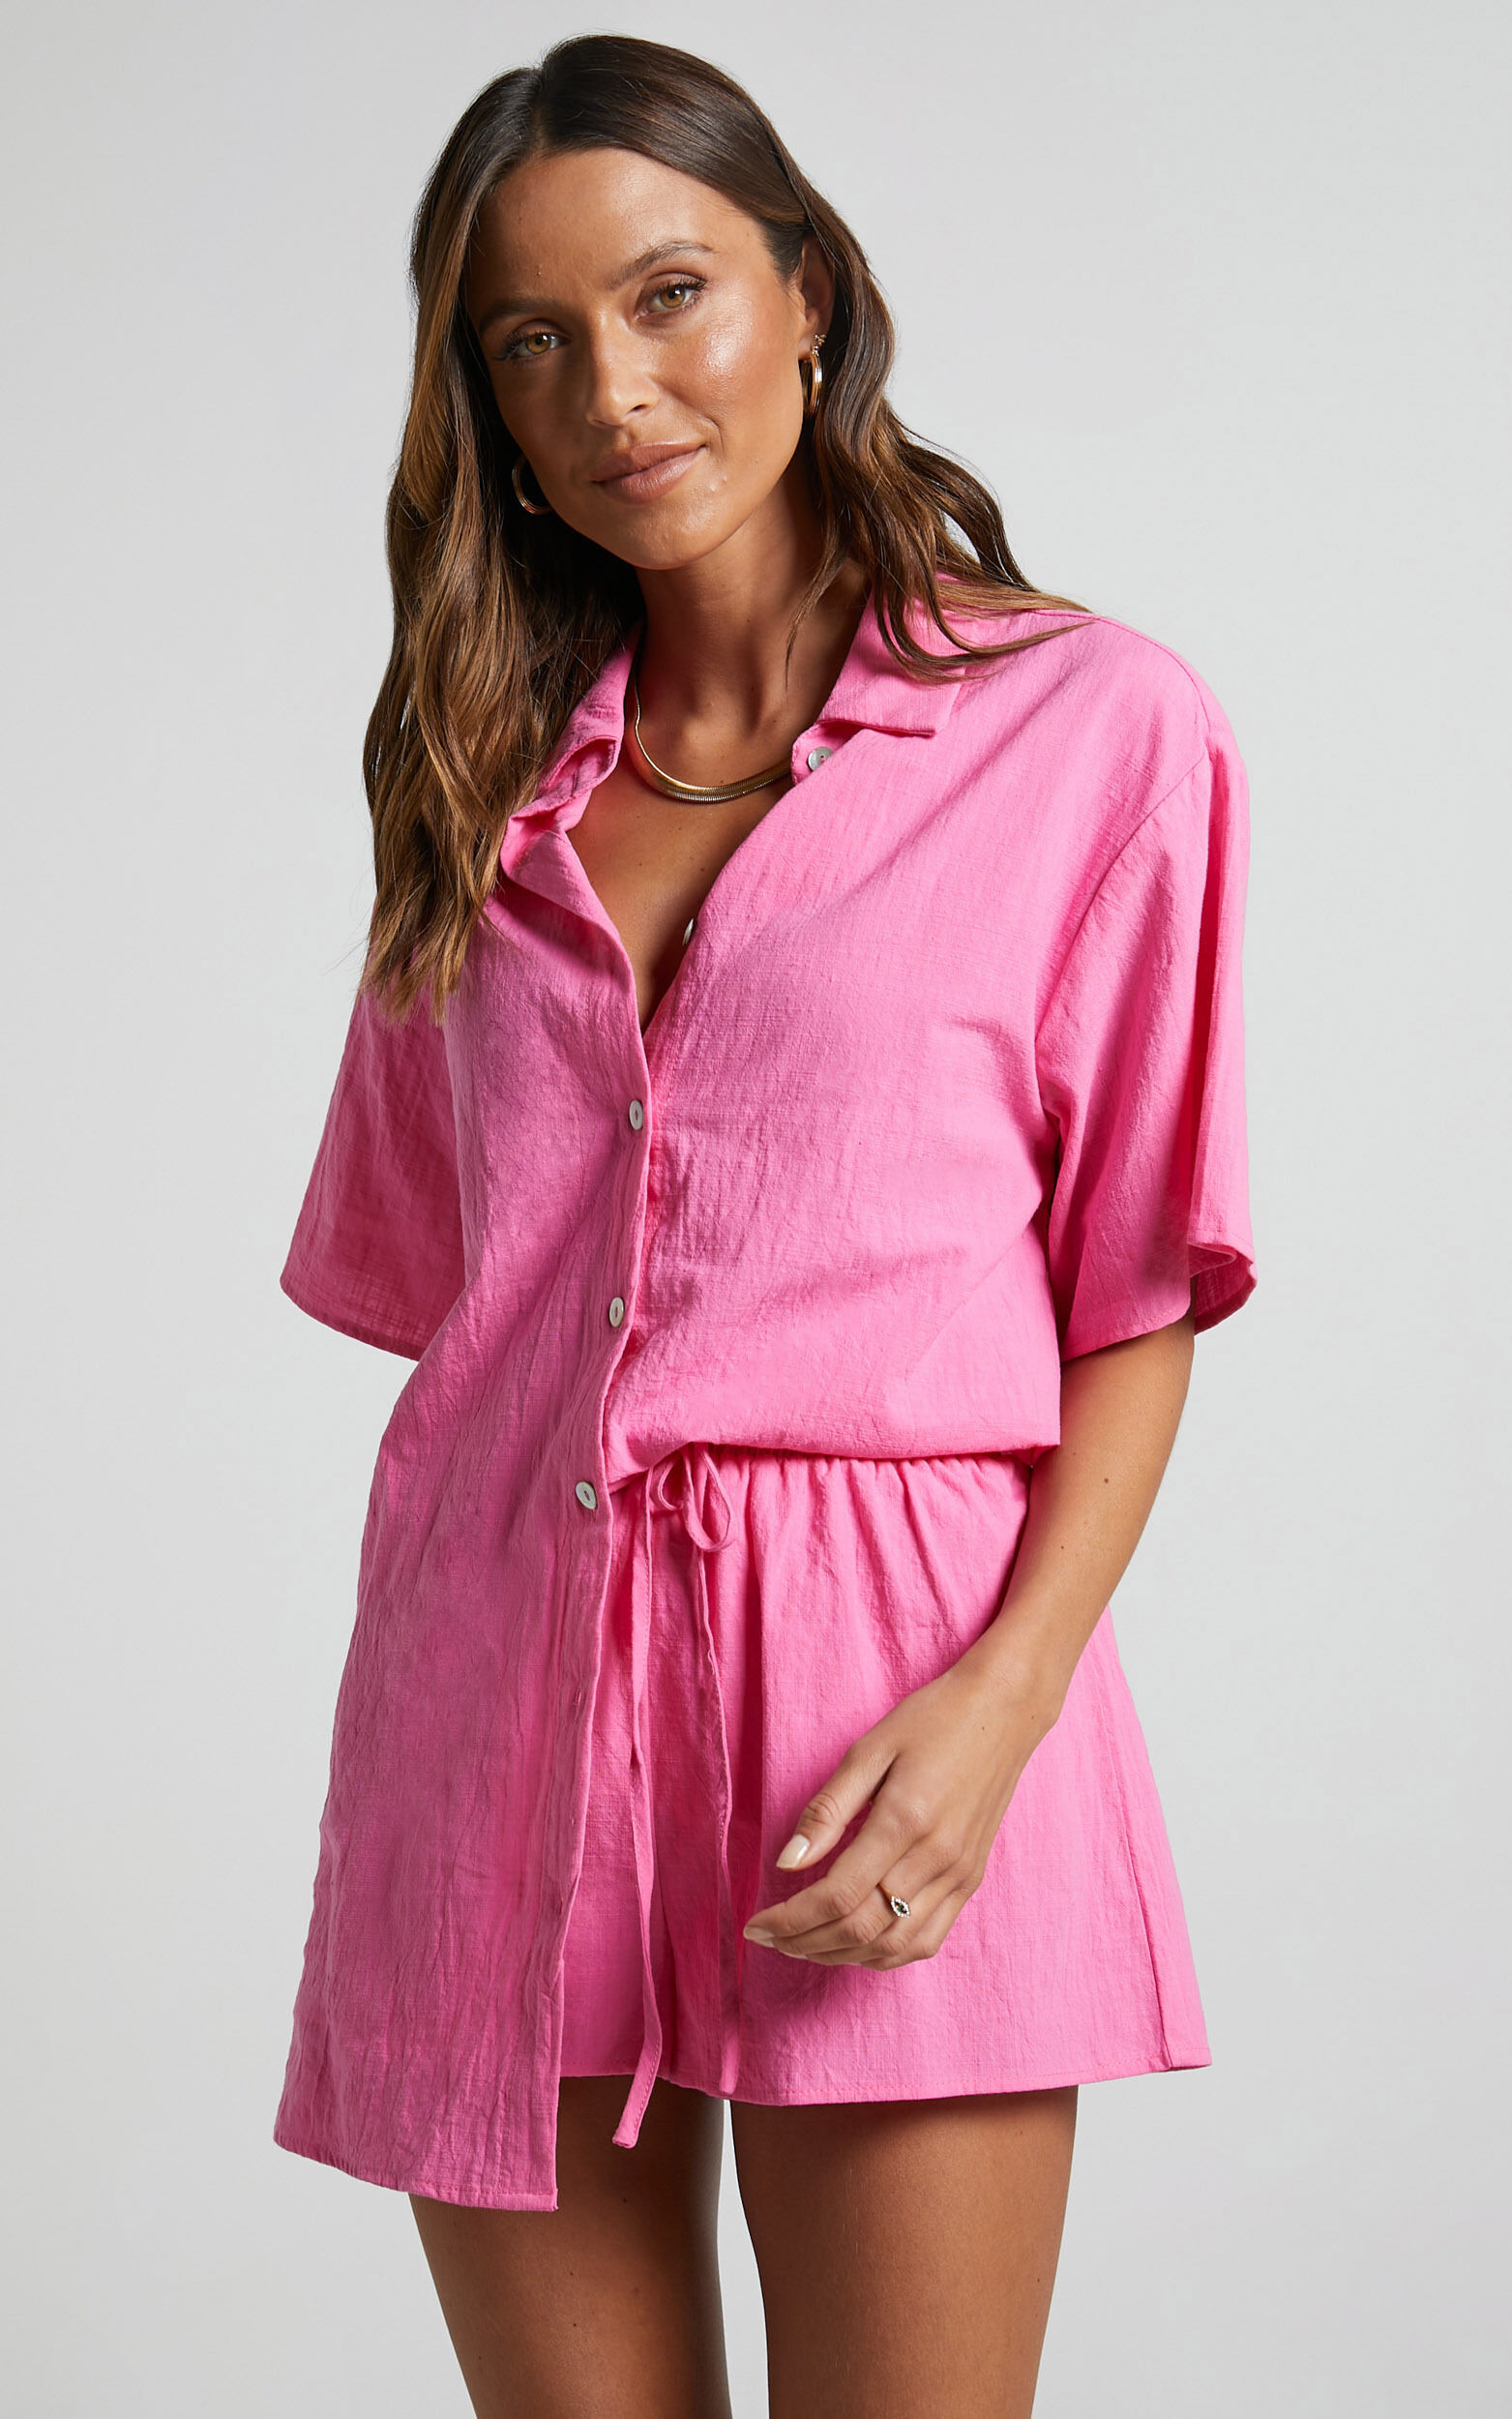 Vina del Mar Button Up Shirt and Shorts Two Piece Set in Hot Pink - 04, PNK1, super-hi-res image number null